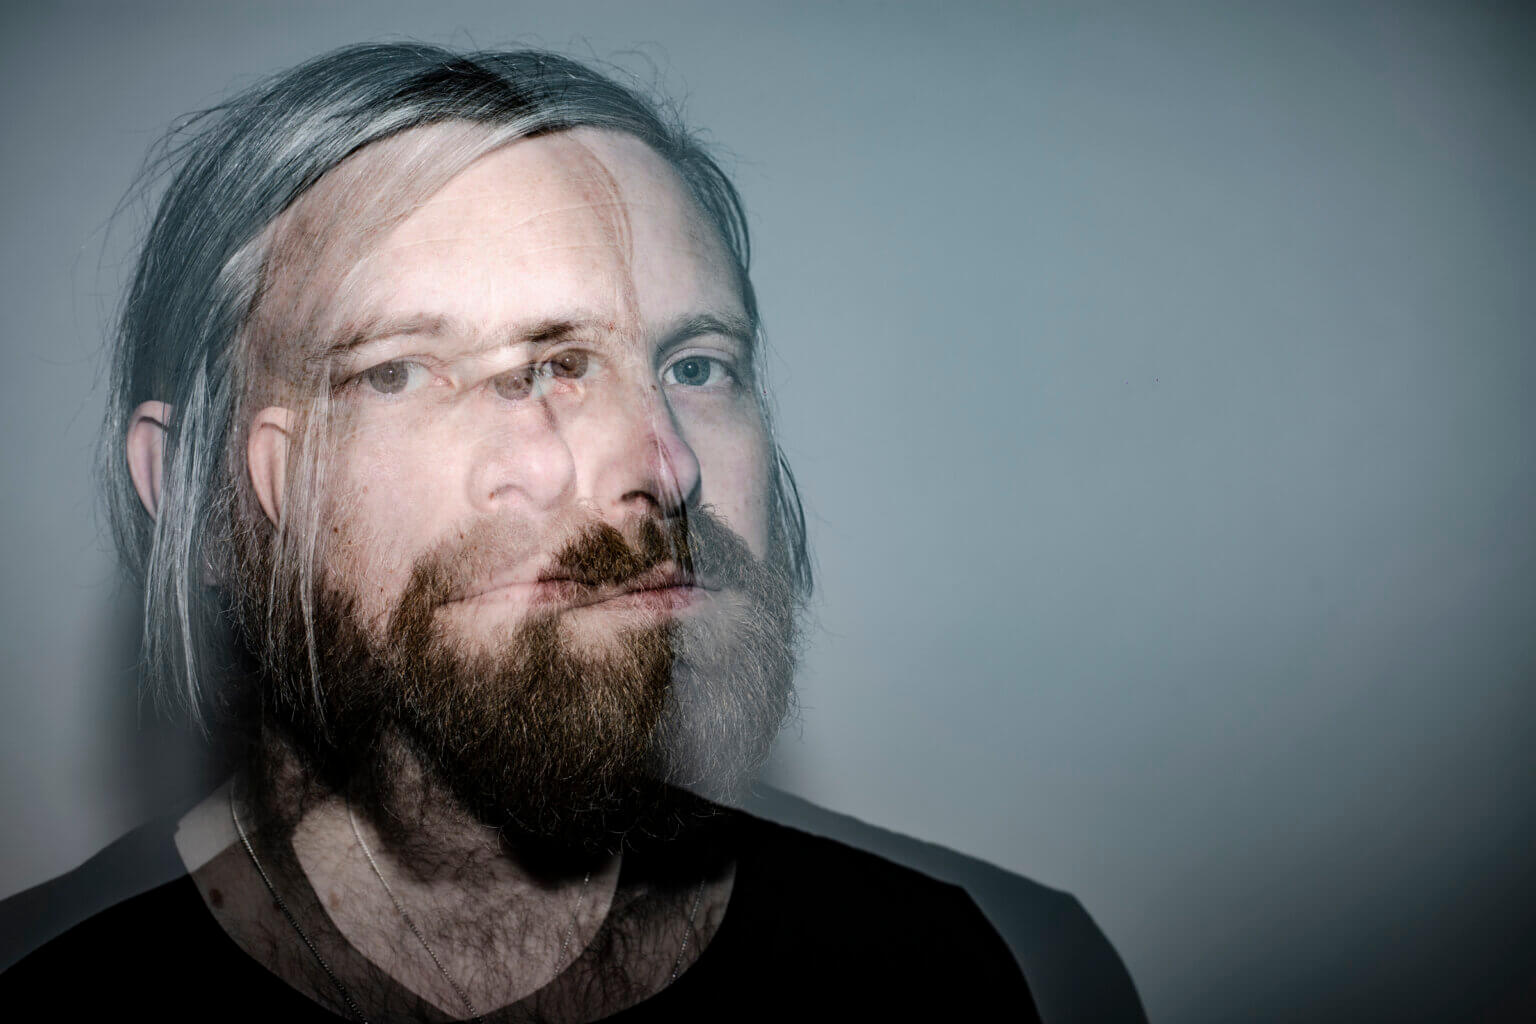 Blanck Mass AKA: Benjamin John Power - presents a new video for “Starstuff” (Single Edit) from his forthcoming album, In Ferneaux